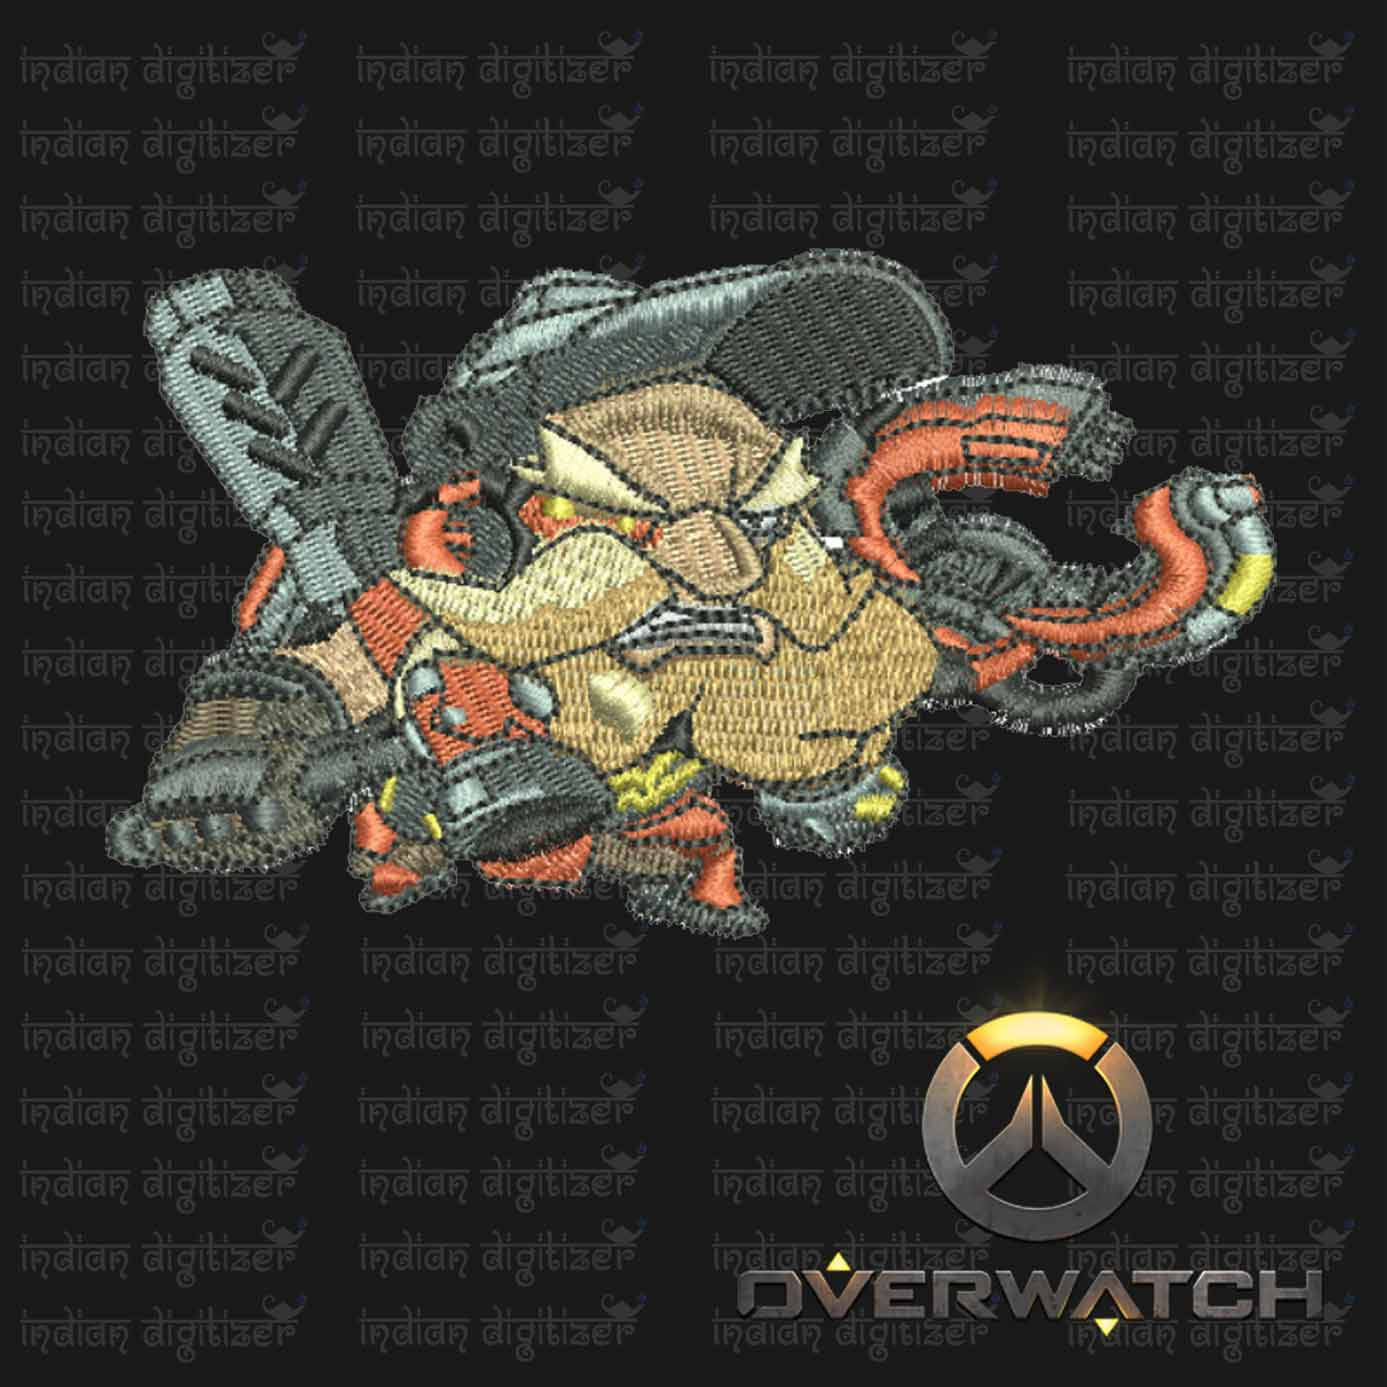 Overwatch Embroidery Designs - Torbjorn individual character for 4x4in hoop - resizable with freely downloadable software.